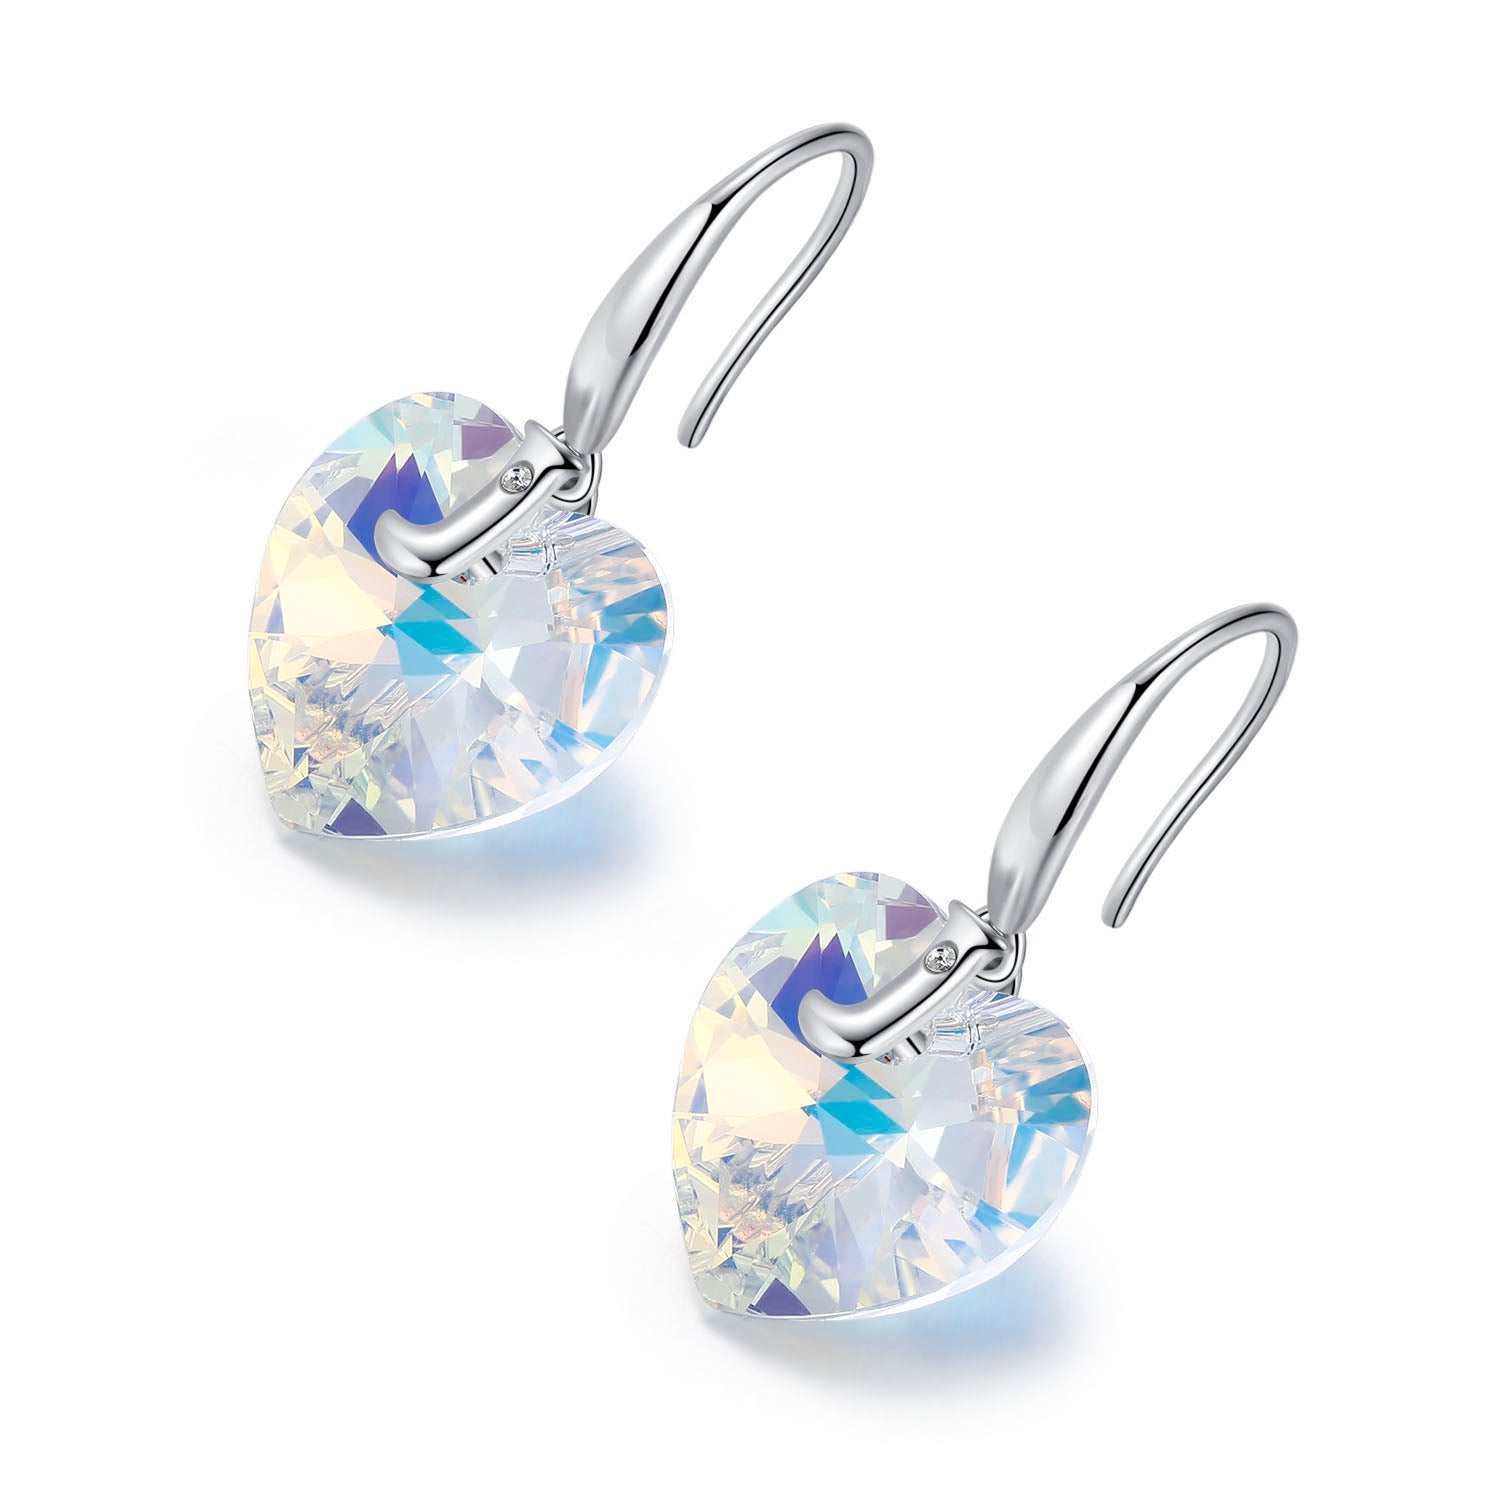 Planet J 925 Sterling Silver Heart Earrings with Swarovski Elements Crystals